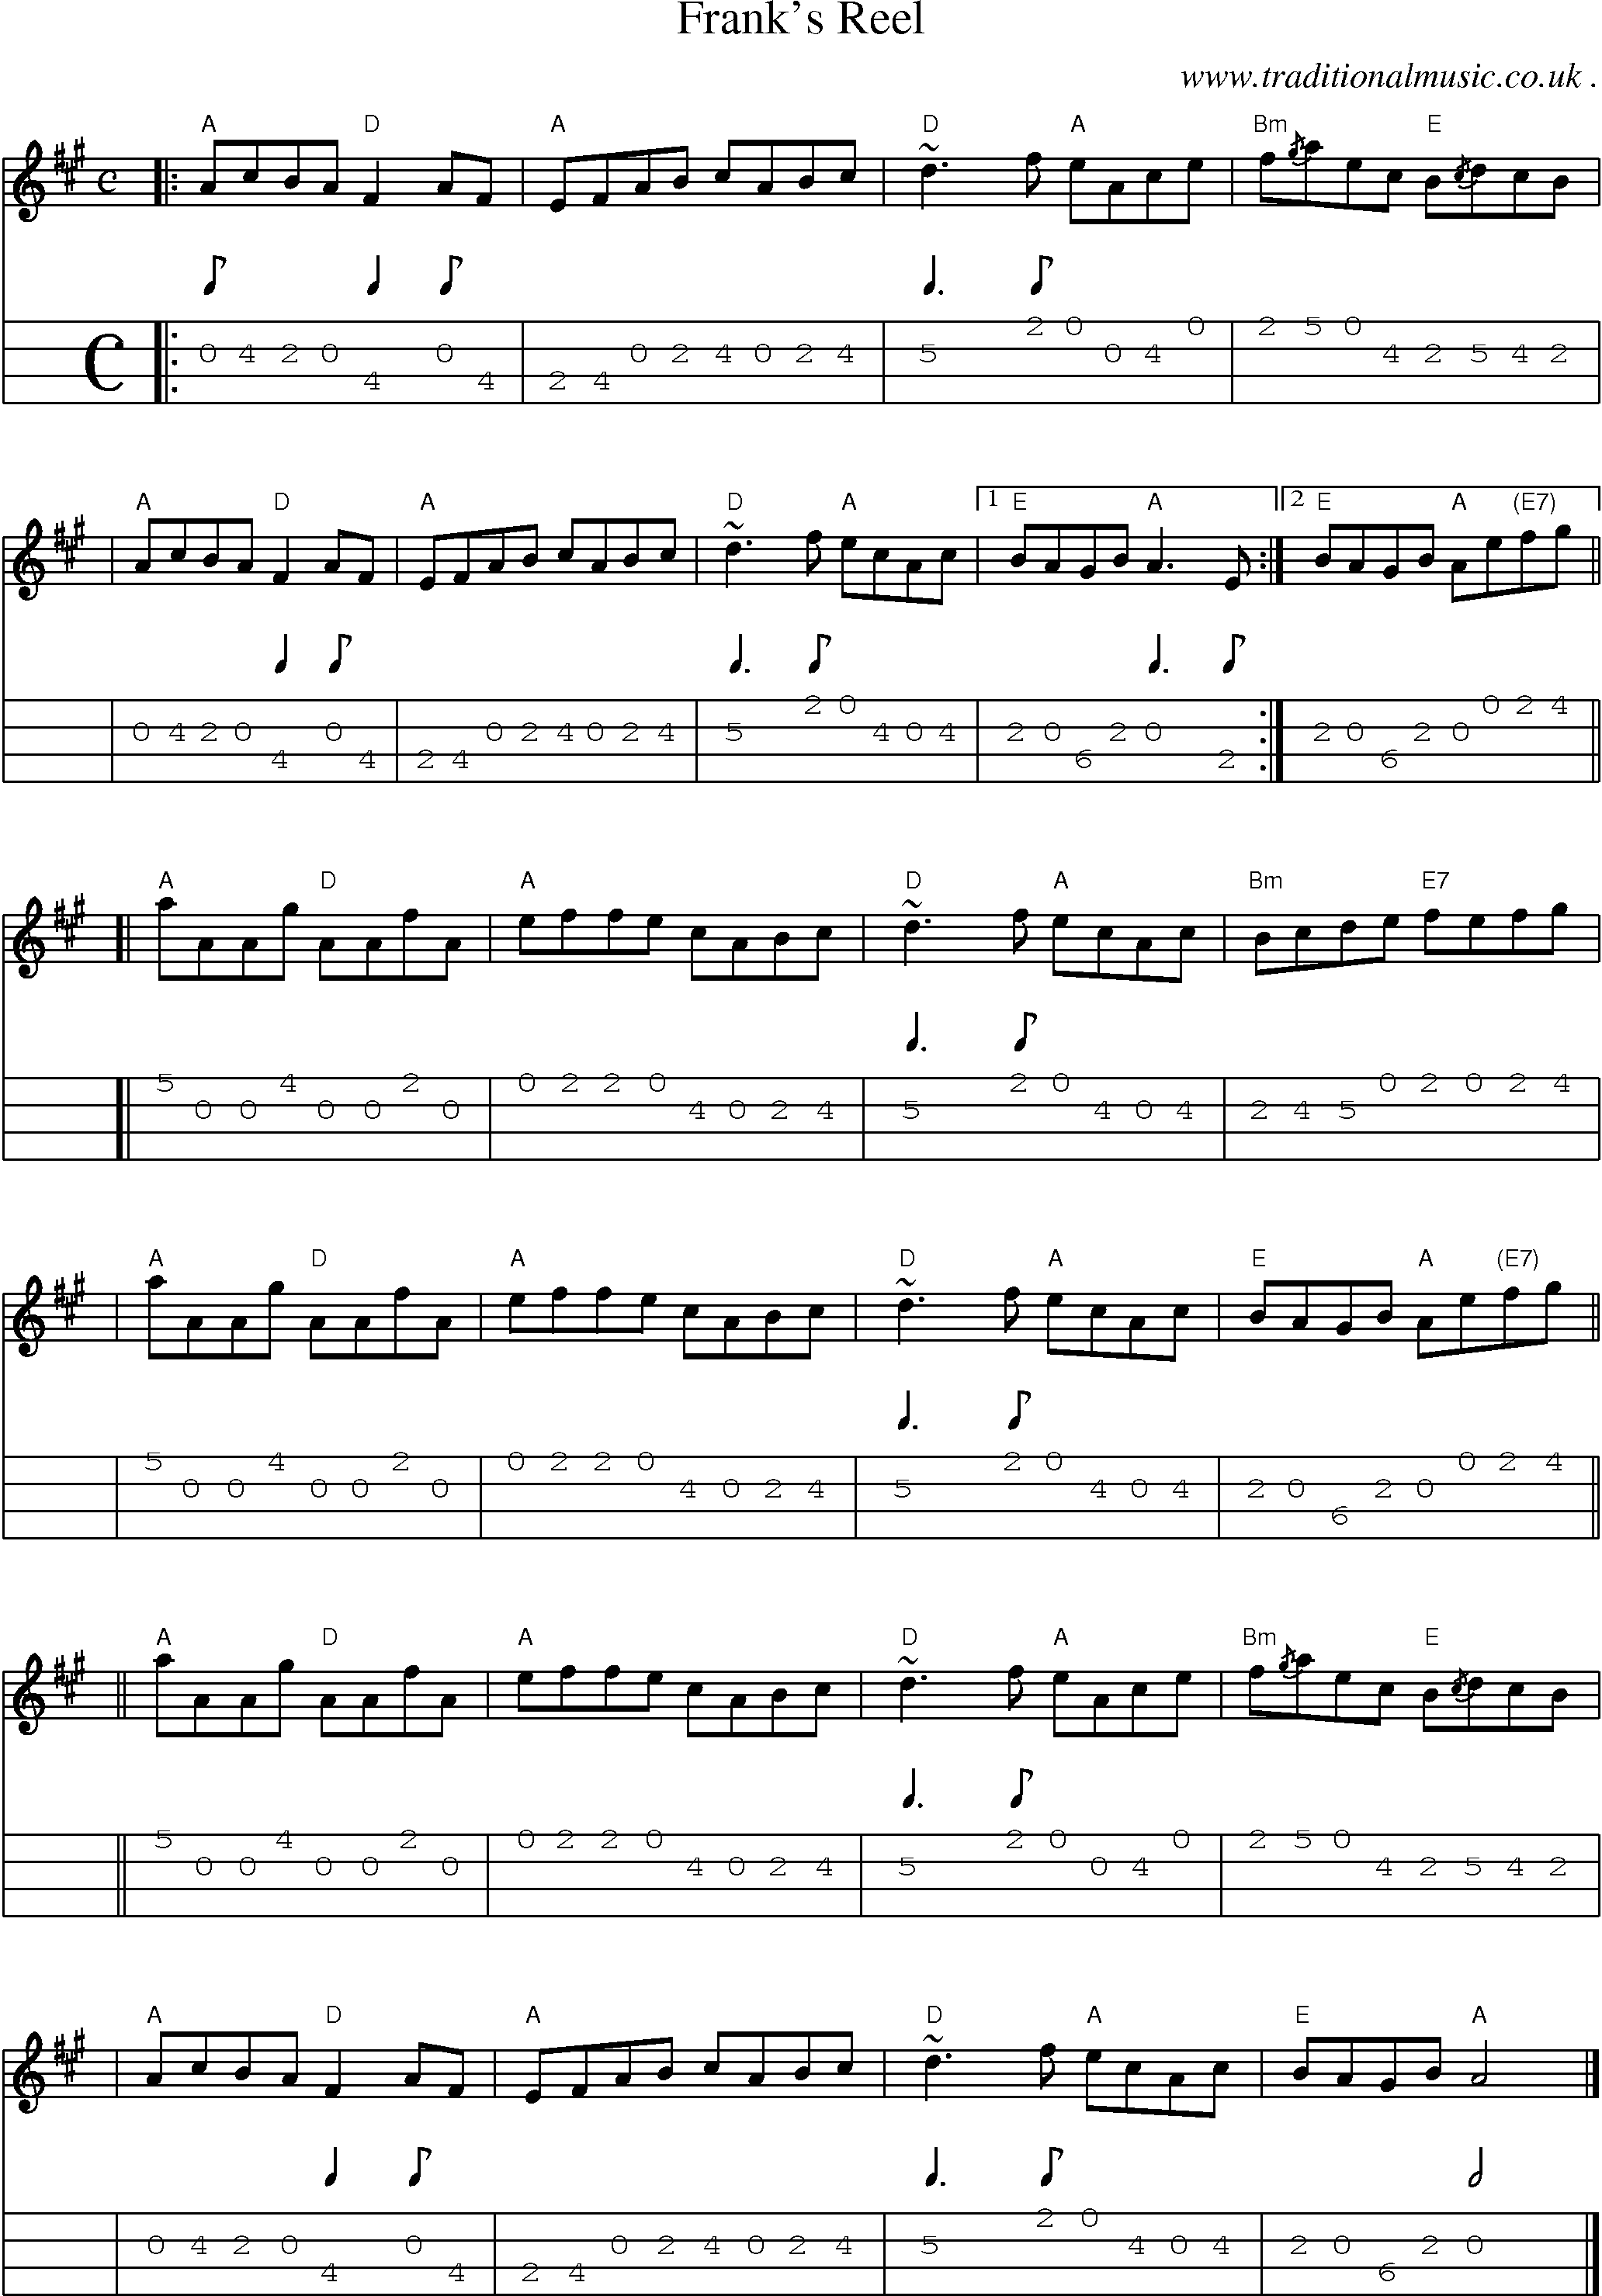 Sheet-music  score, Chords and Mandolin Tabs for Franks Reel